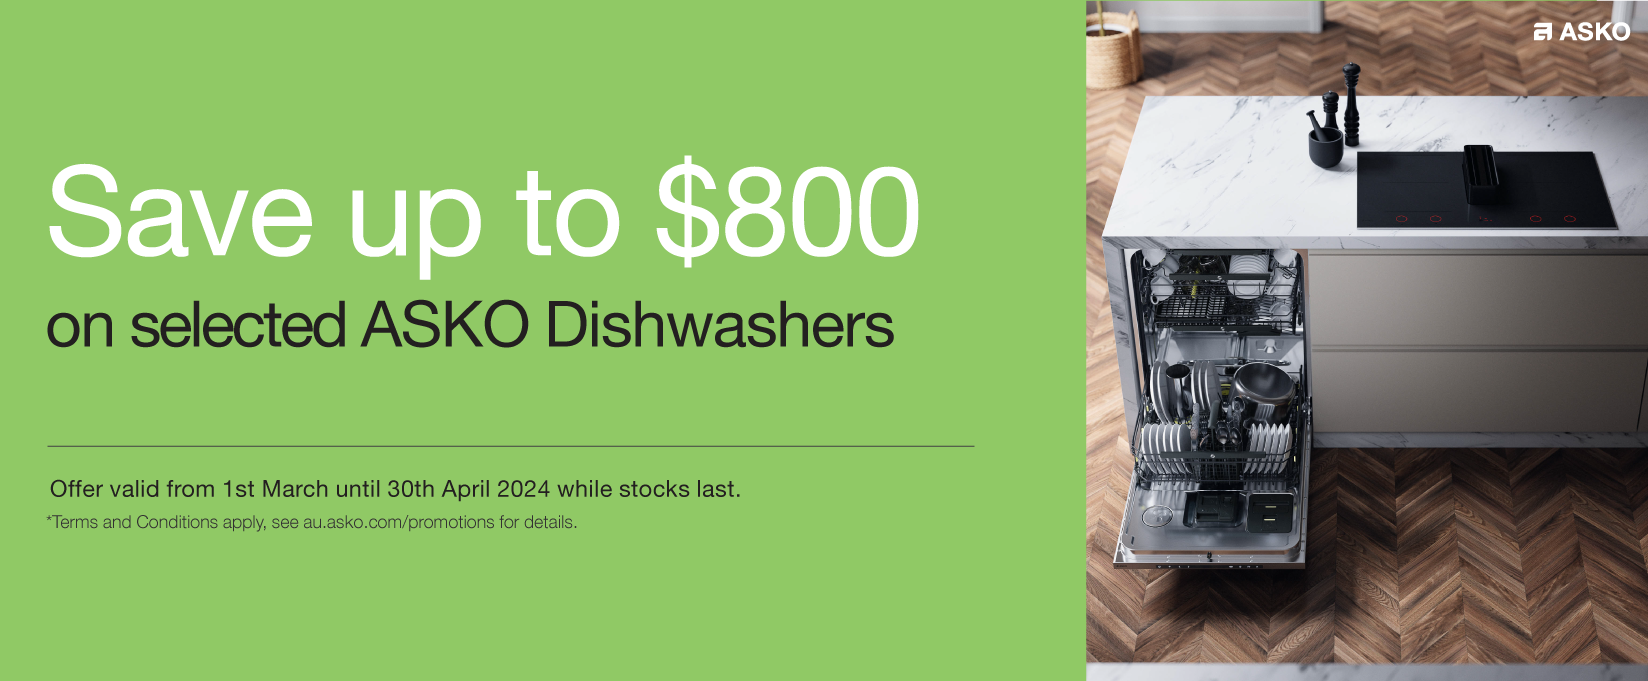 Save Up To $800 On Selected ASKO Dishwashers